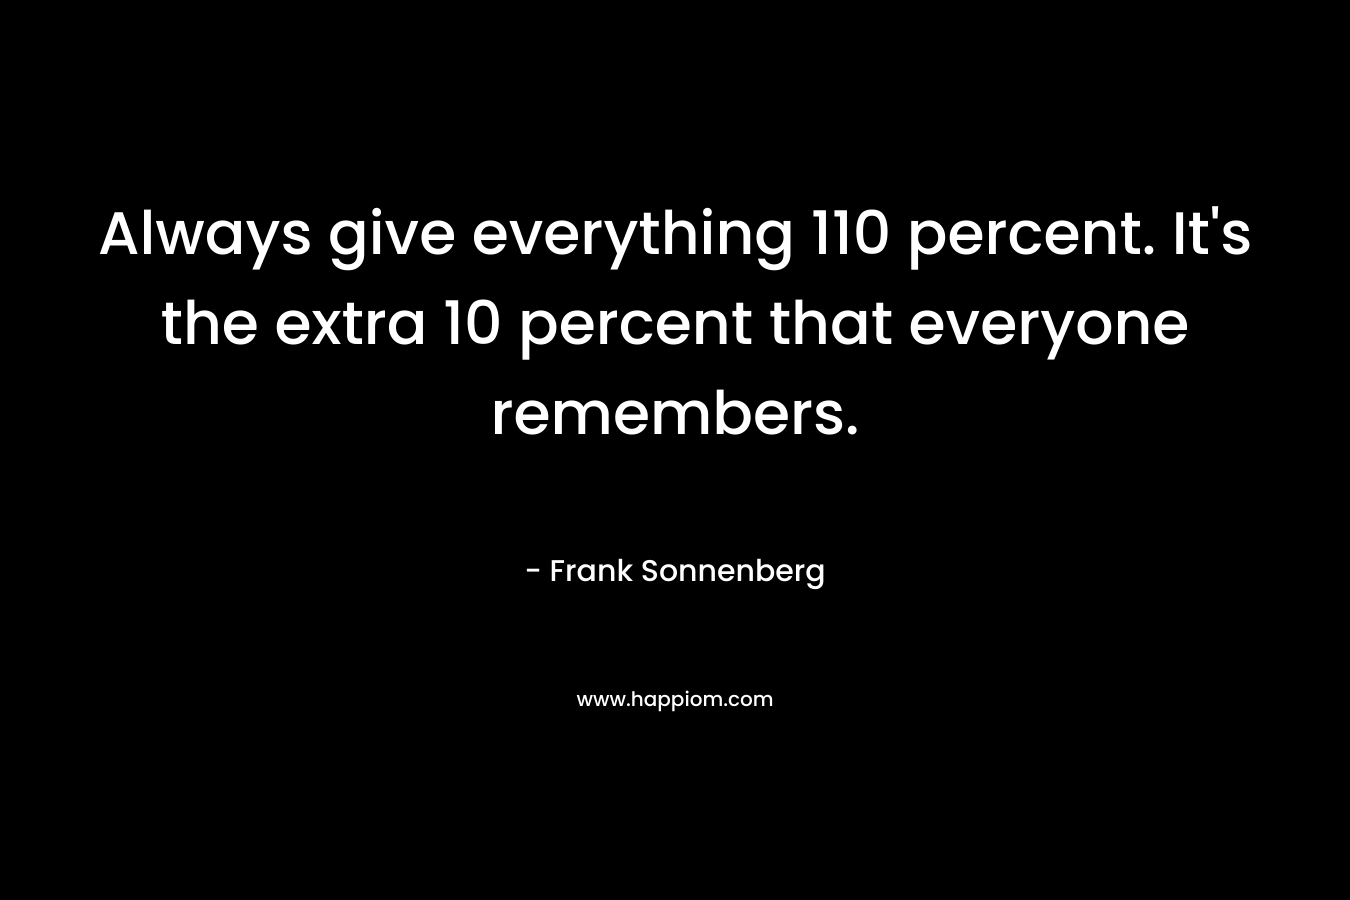 Always give everything 110 percent. It's the extra 10 percent that everyone remembers.